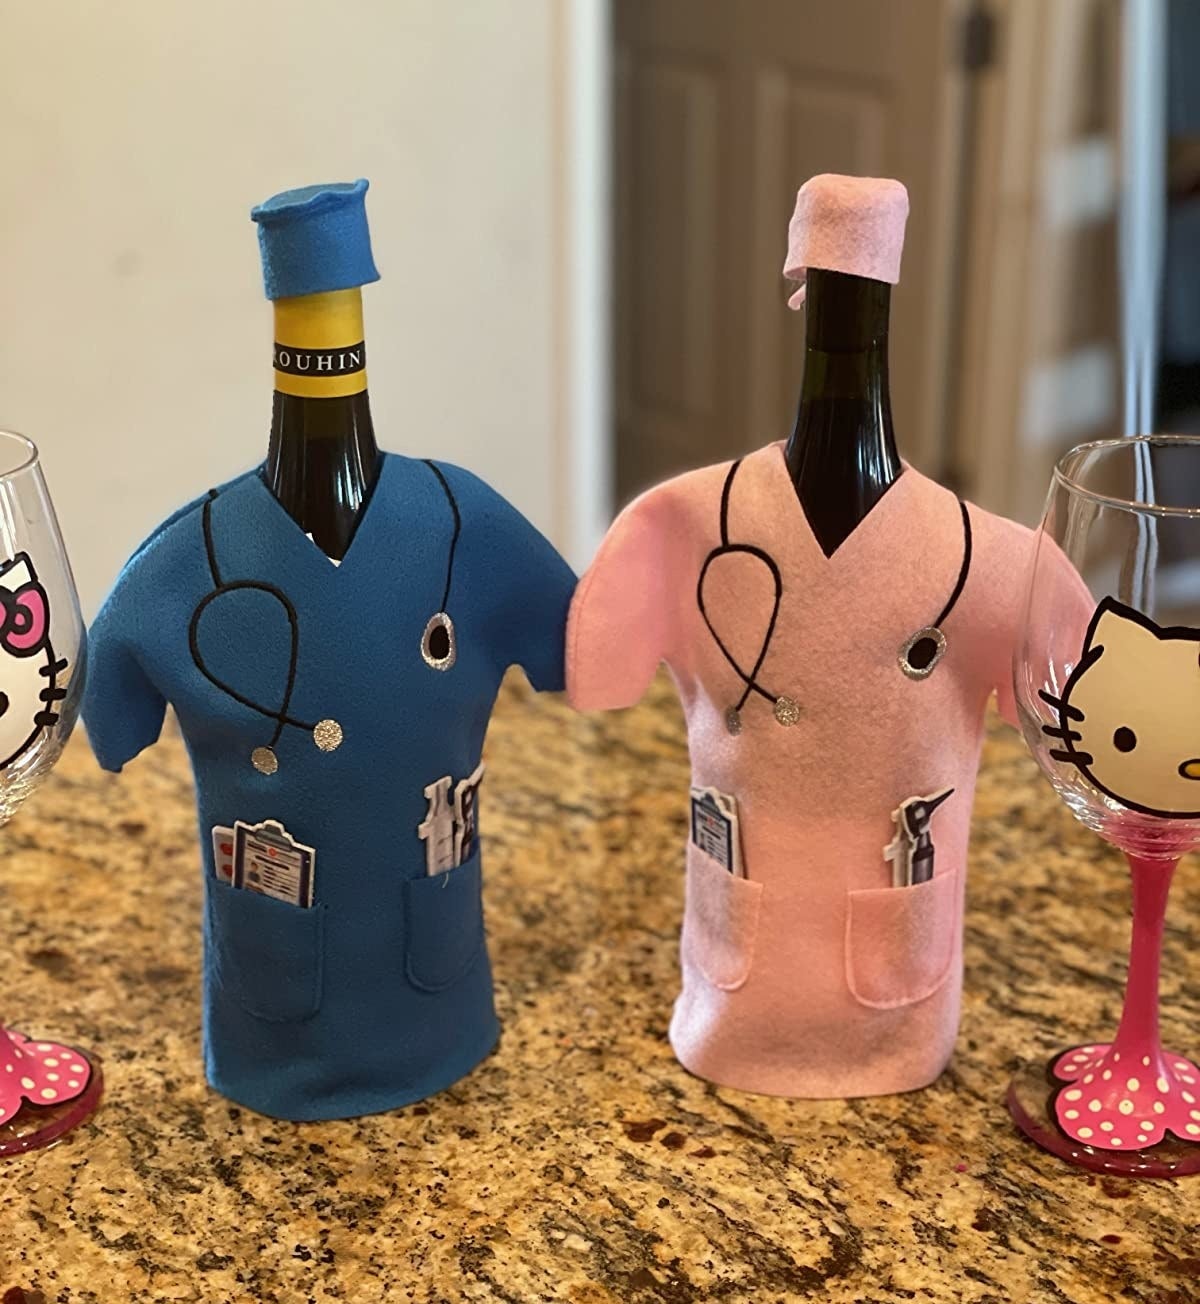 Reviewer photo of two bottles of wine, one in blue scrubs and the other in pink